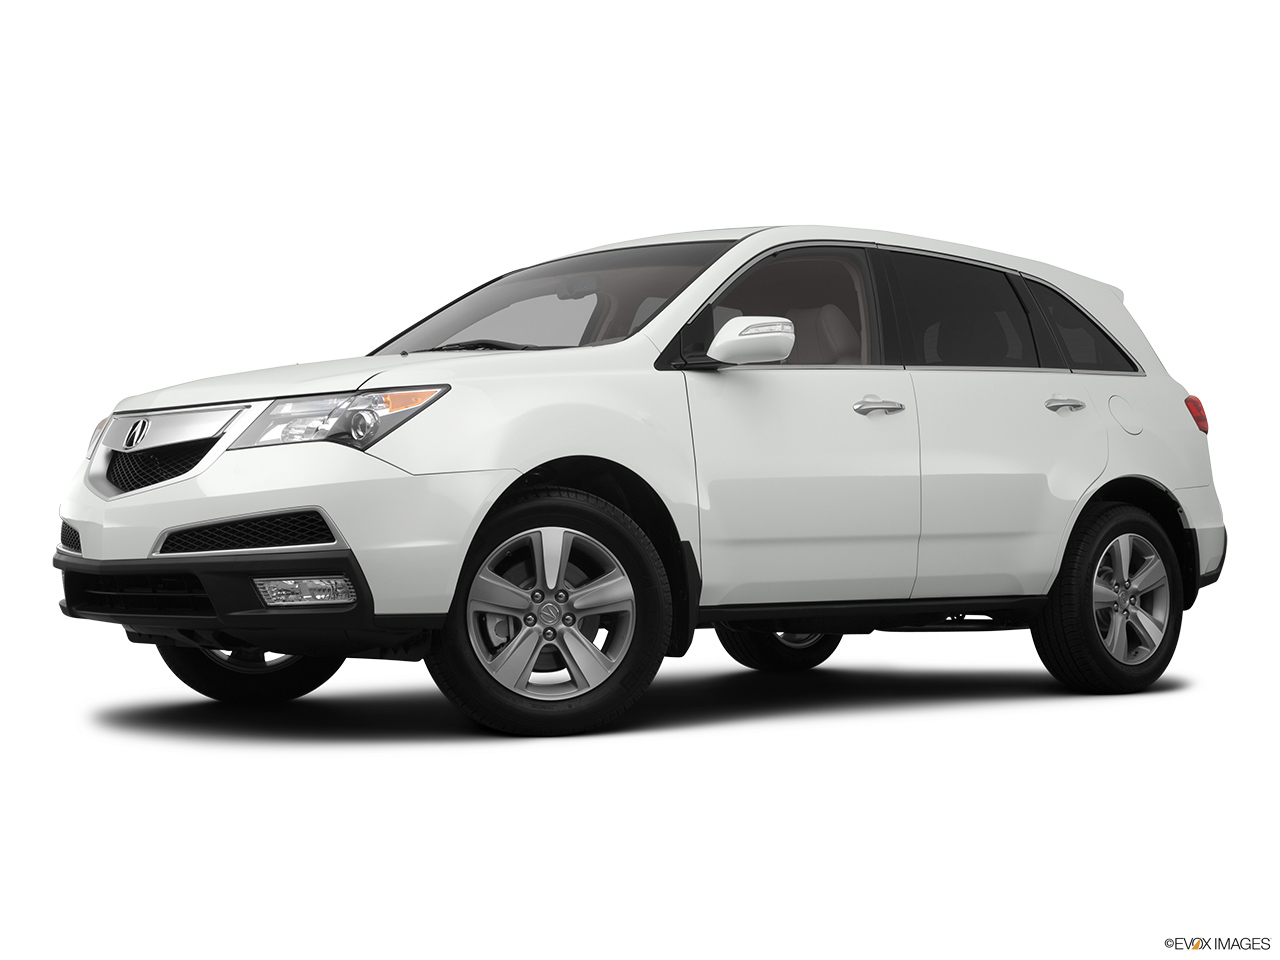 2012 Acura MDX MDX Low/wide front 5/8. 